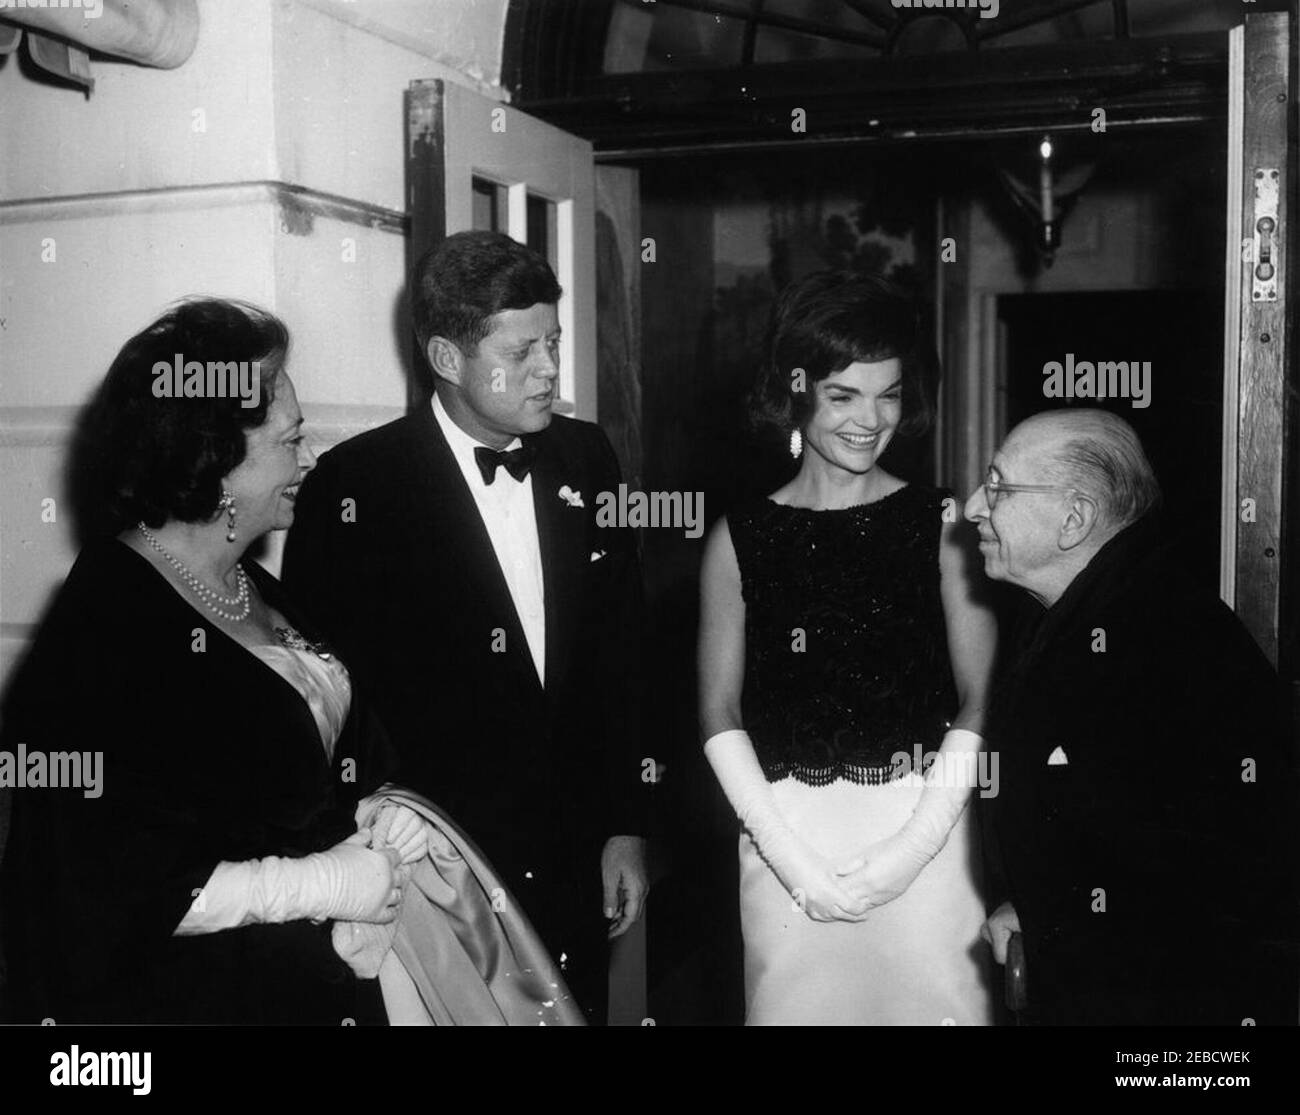 Dinner in honor of Igor Stravinsky, 8:00PM. President John F. Kennedy and First Lady Jacqueline Kennedy greet composer Igor Stravinsky and his wife Vera de Bosset Stravinsky as they arrive for a dinner party. White House, Washington, D.C. Stock Photo